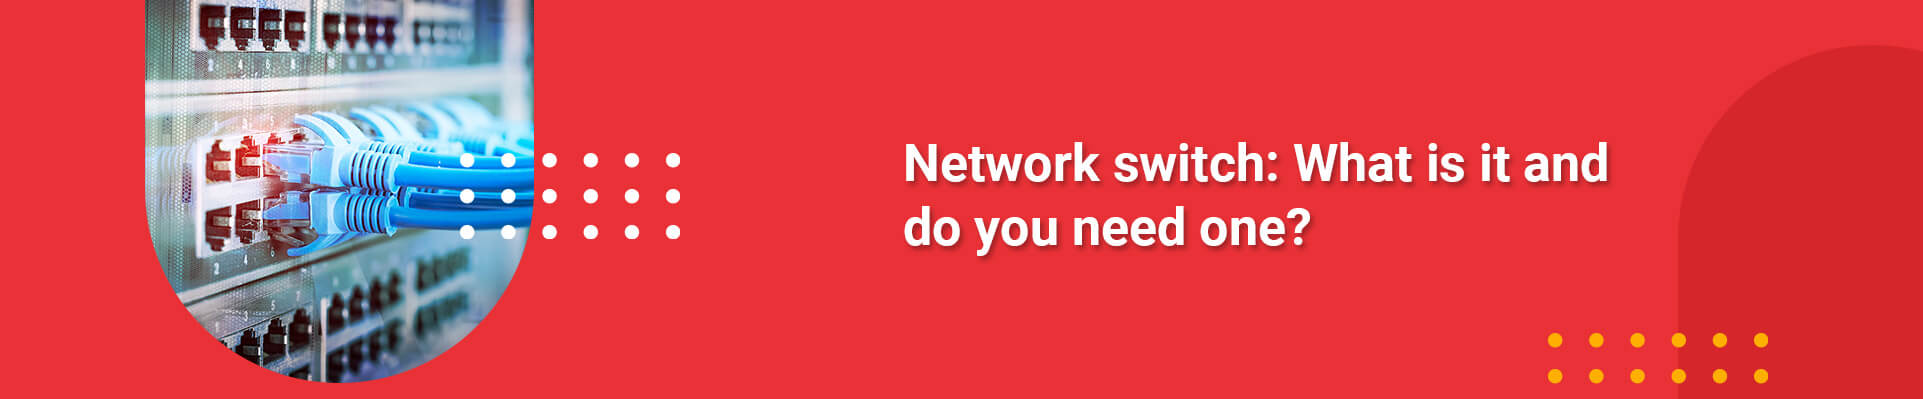 What is a Network Switch?